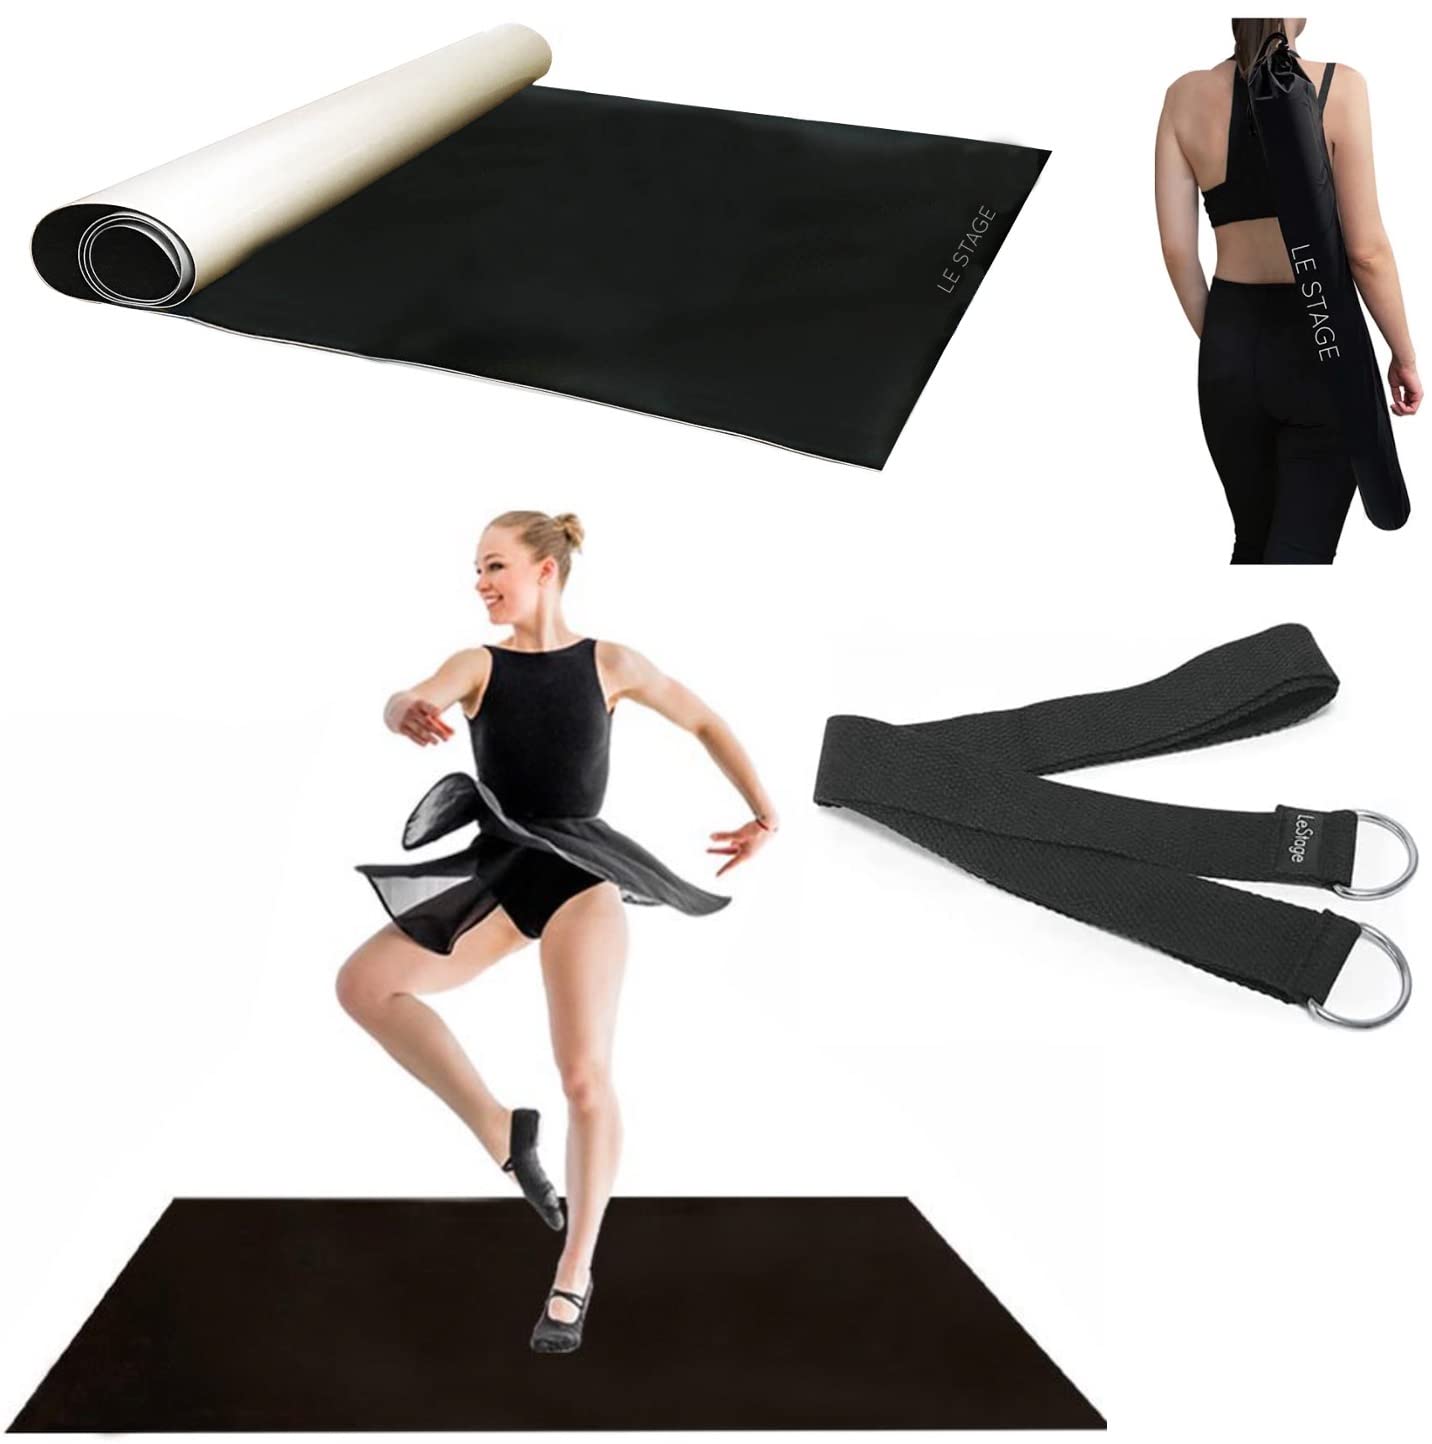 LeStage Dance Floor Portable Dance Floor Mat with Stretch Strap Controlled  Slip Surface to Practice and Improve Dance Ballet Performance at Home,  Studios, Stage Kids & Adults 71 x 36.5